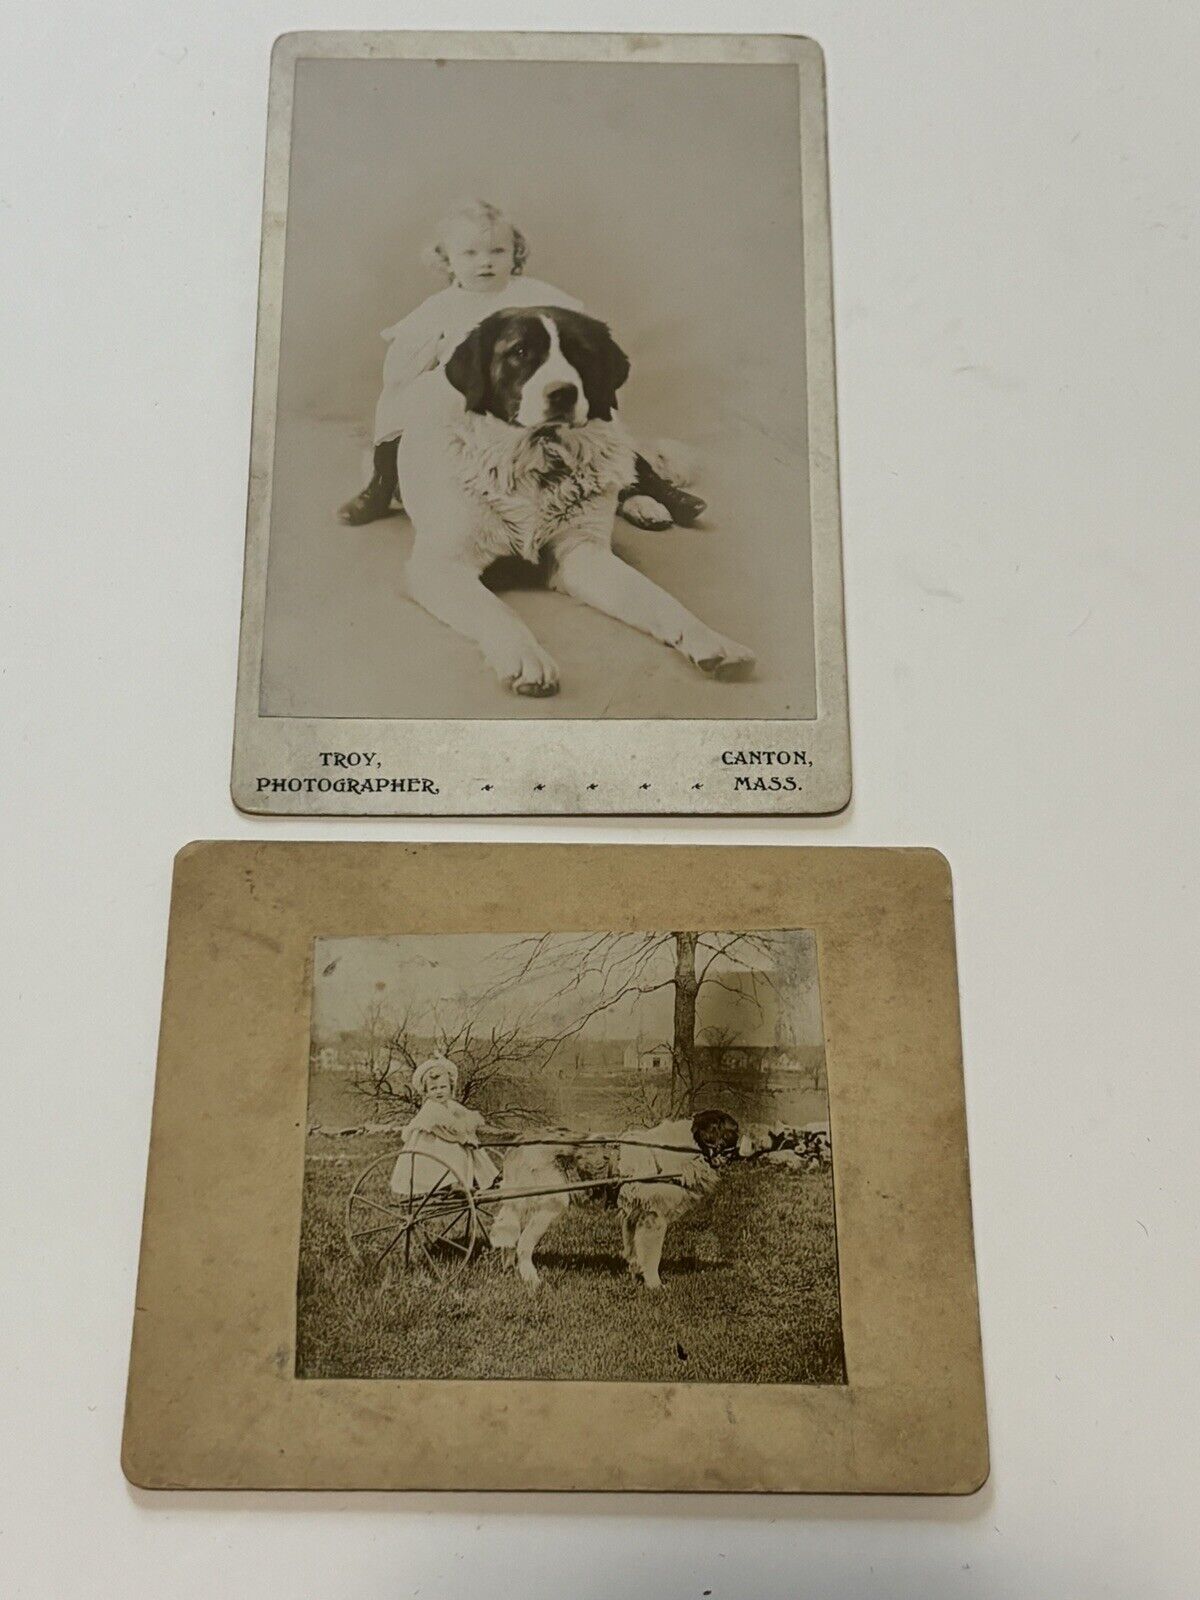 Antique Cabinet Card Photograph Child Outdoors With Big St Bernard Dog Pair